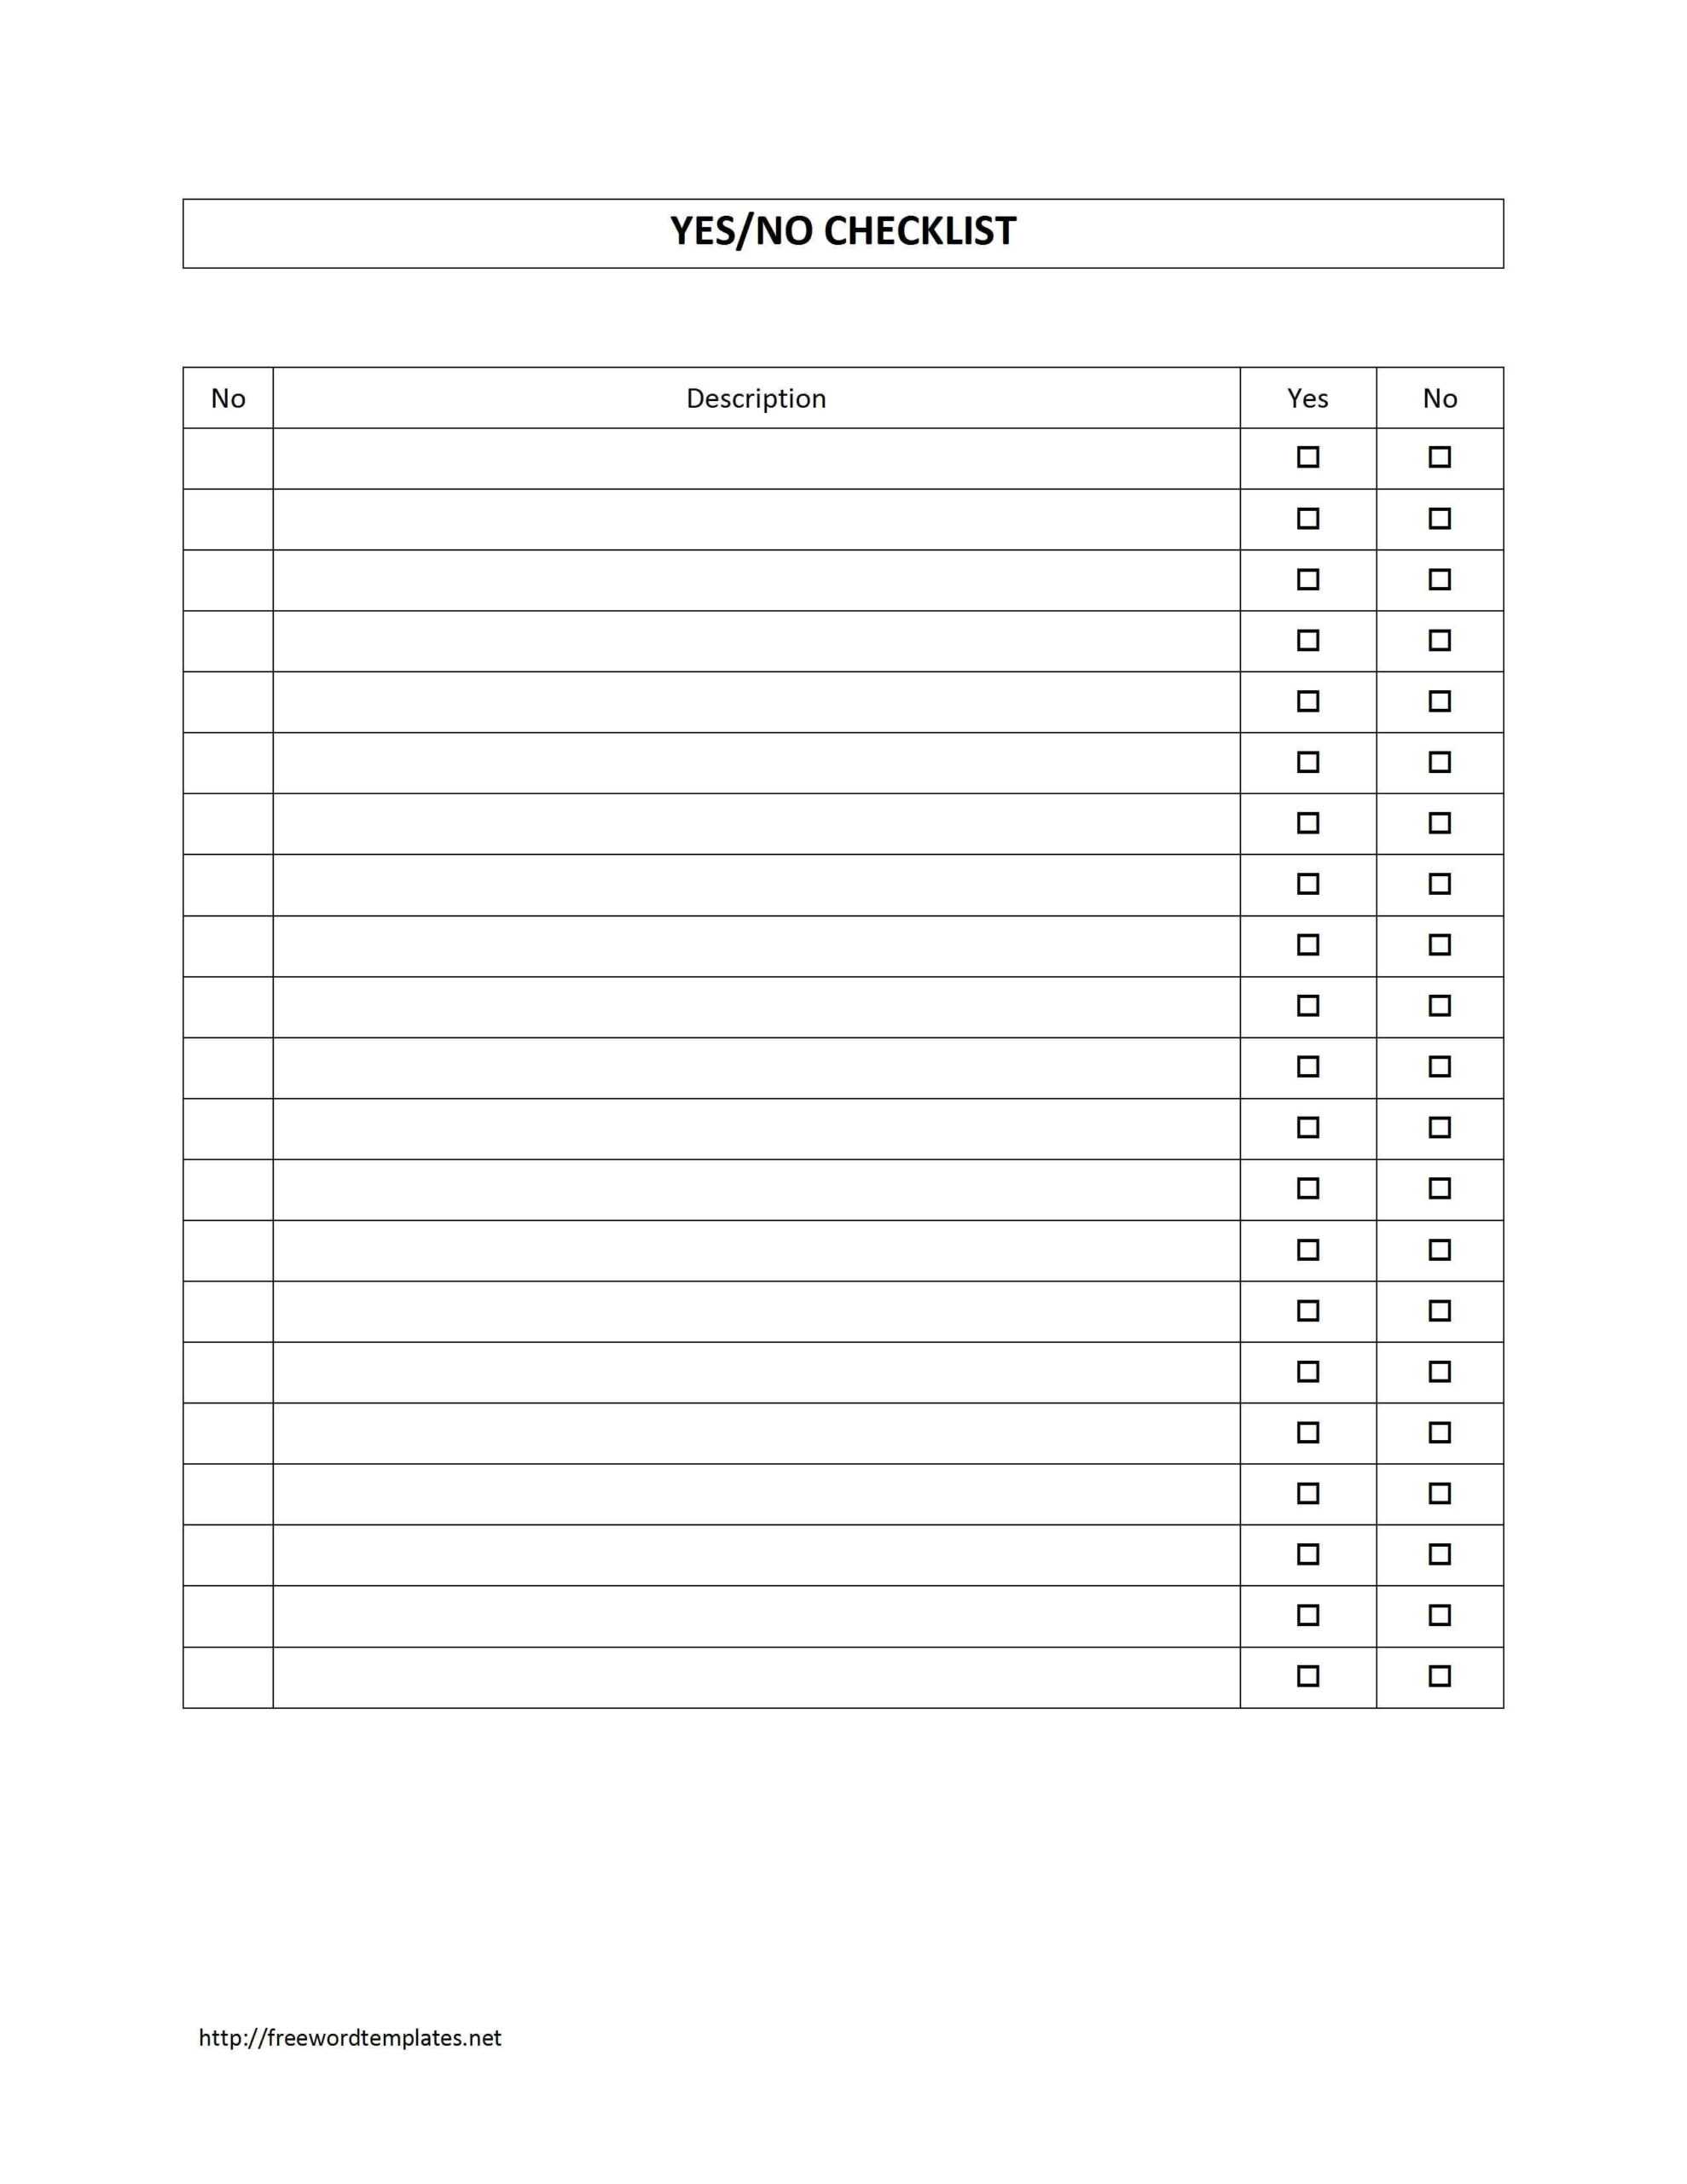 Survey Sheet With Yes/no Checklist Template | Free Microsoft Pertaining To Blank Checklist Template Word